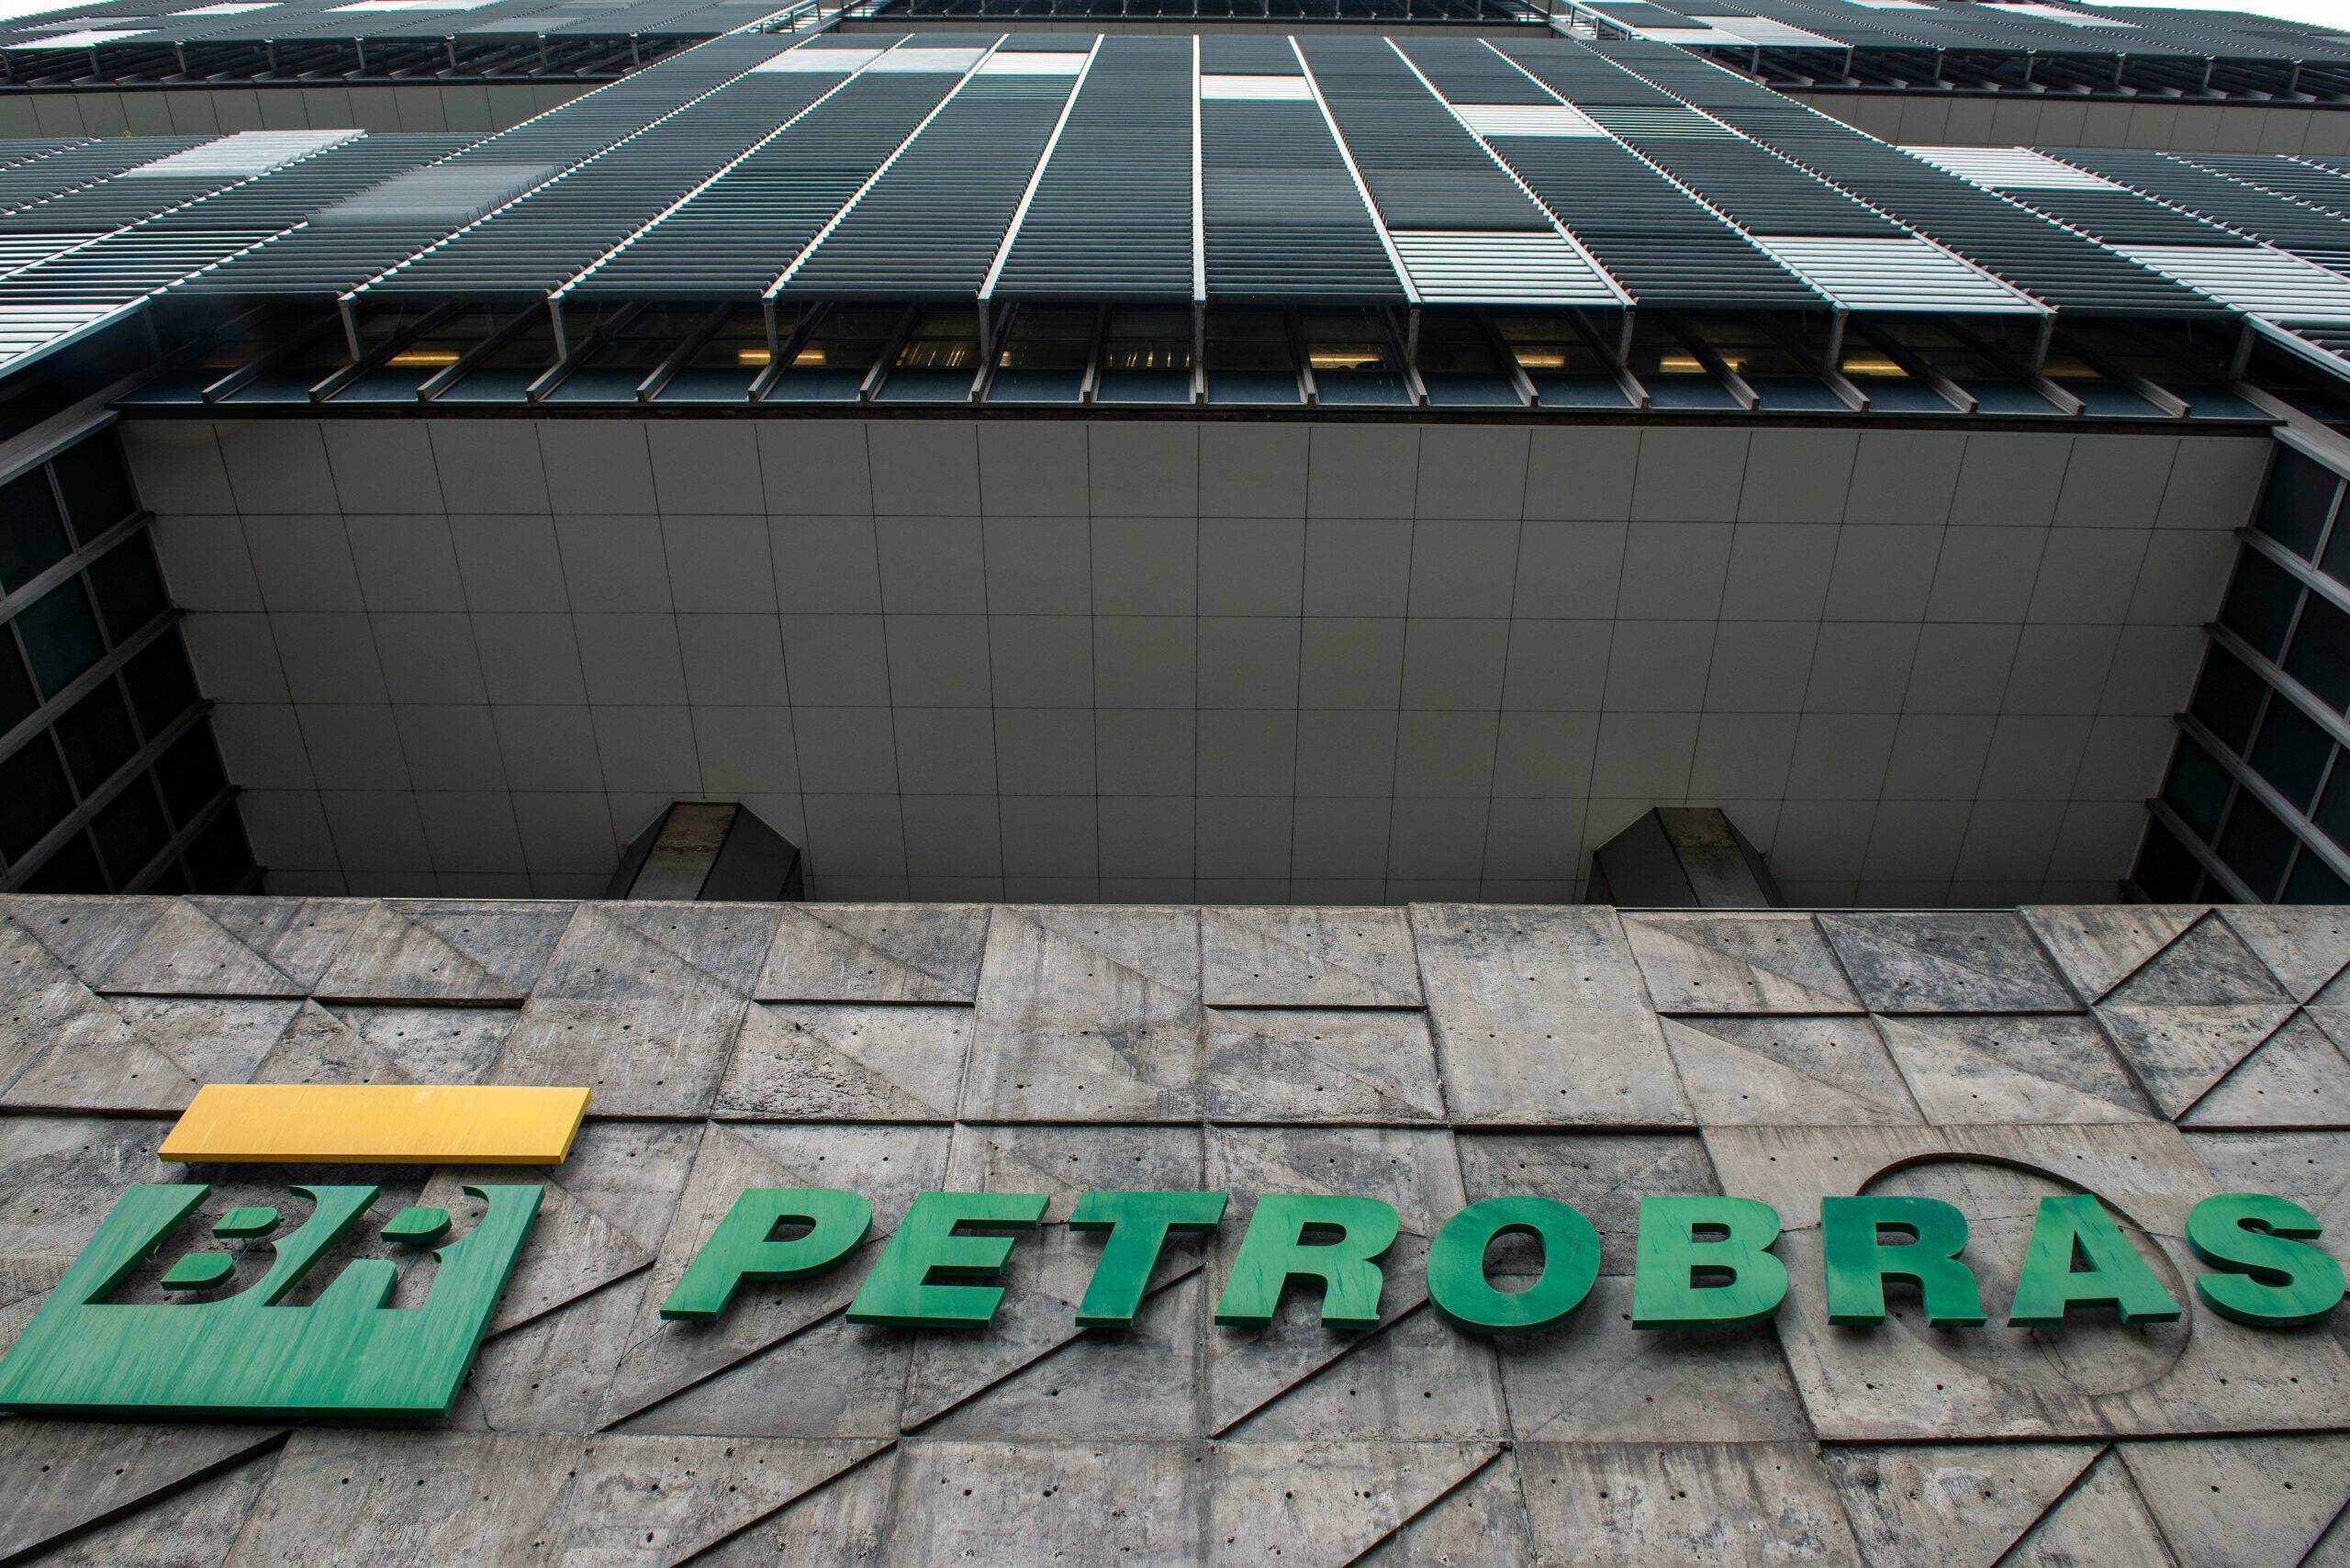 Mandatory Credit: Photo by Chico Ferreira/Penta Press/Shutterstock (11771472a)
PETROBRAS headquarters. The Brazilian oil company had a strong fall in its shares in the market on February 22, 2021.
PETROBRAS, Rio de Janeiro, Brazil - 22 Feb 2021/shutterstock_editorial_PETROBRAS_Rio_de_Janeiro_Brazi_11771472A//2102222035